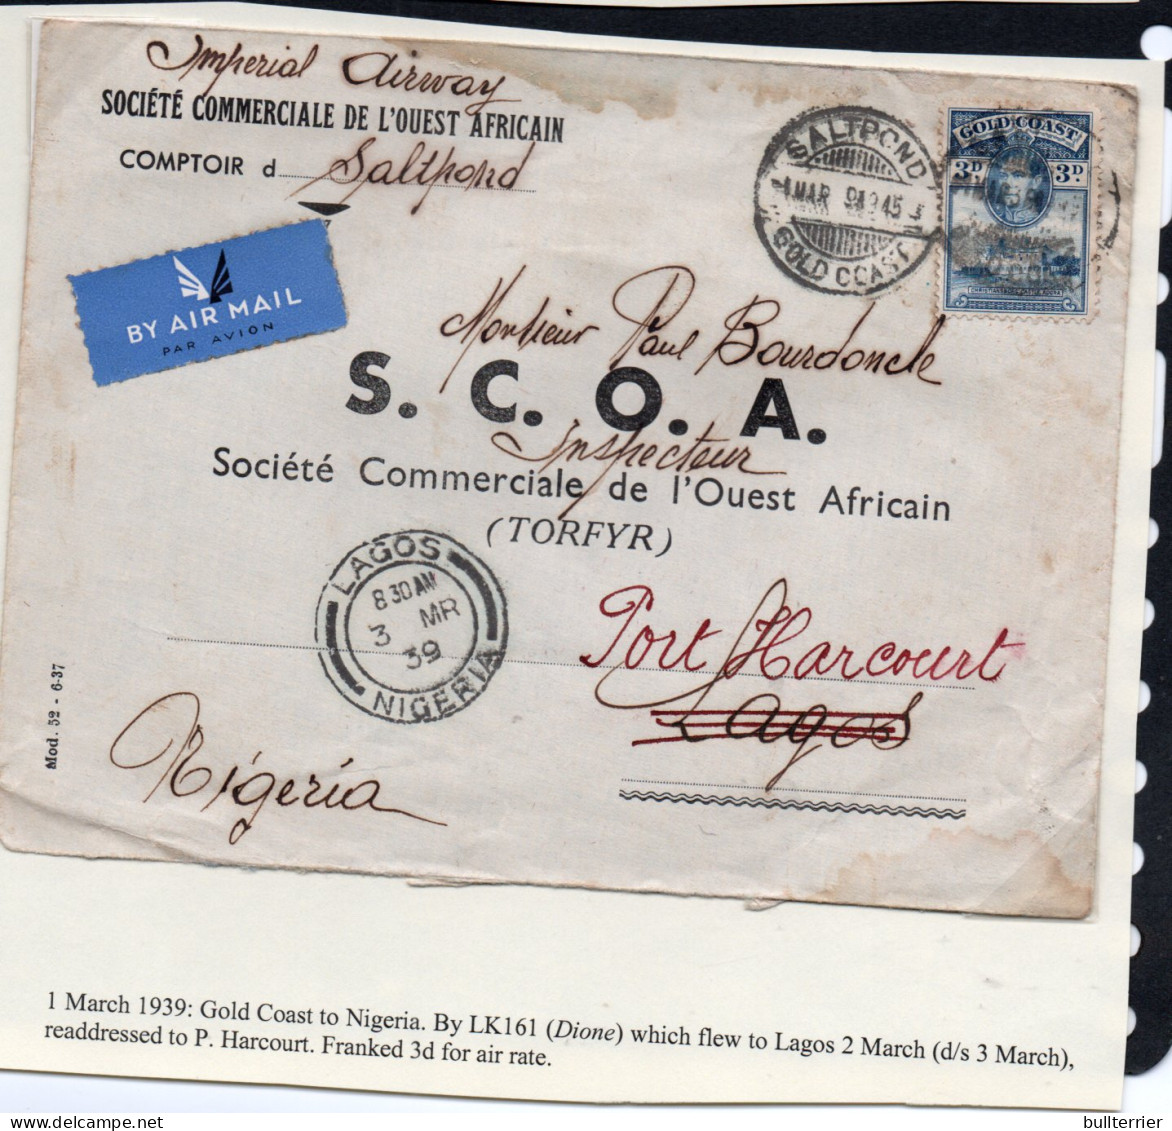 GOLD COAST -  1939 - IMPERIAL AIRWAYS  COVER TO LAGOS REDIRECTED TO PORT HARCOURT WITH BACKSTAMP - Goudkust (...-1957)